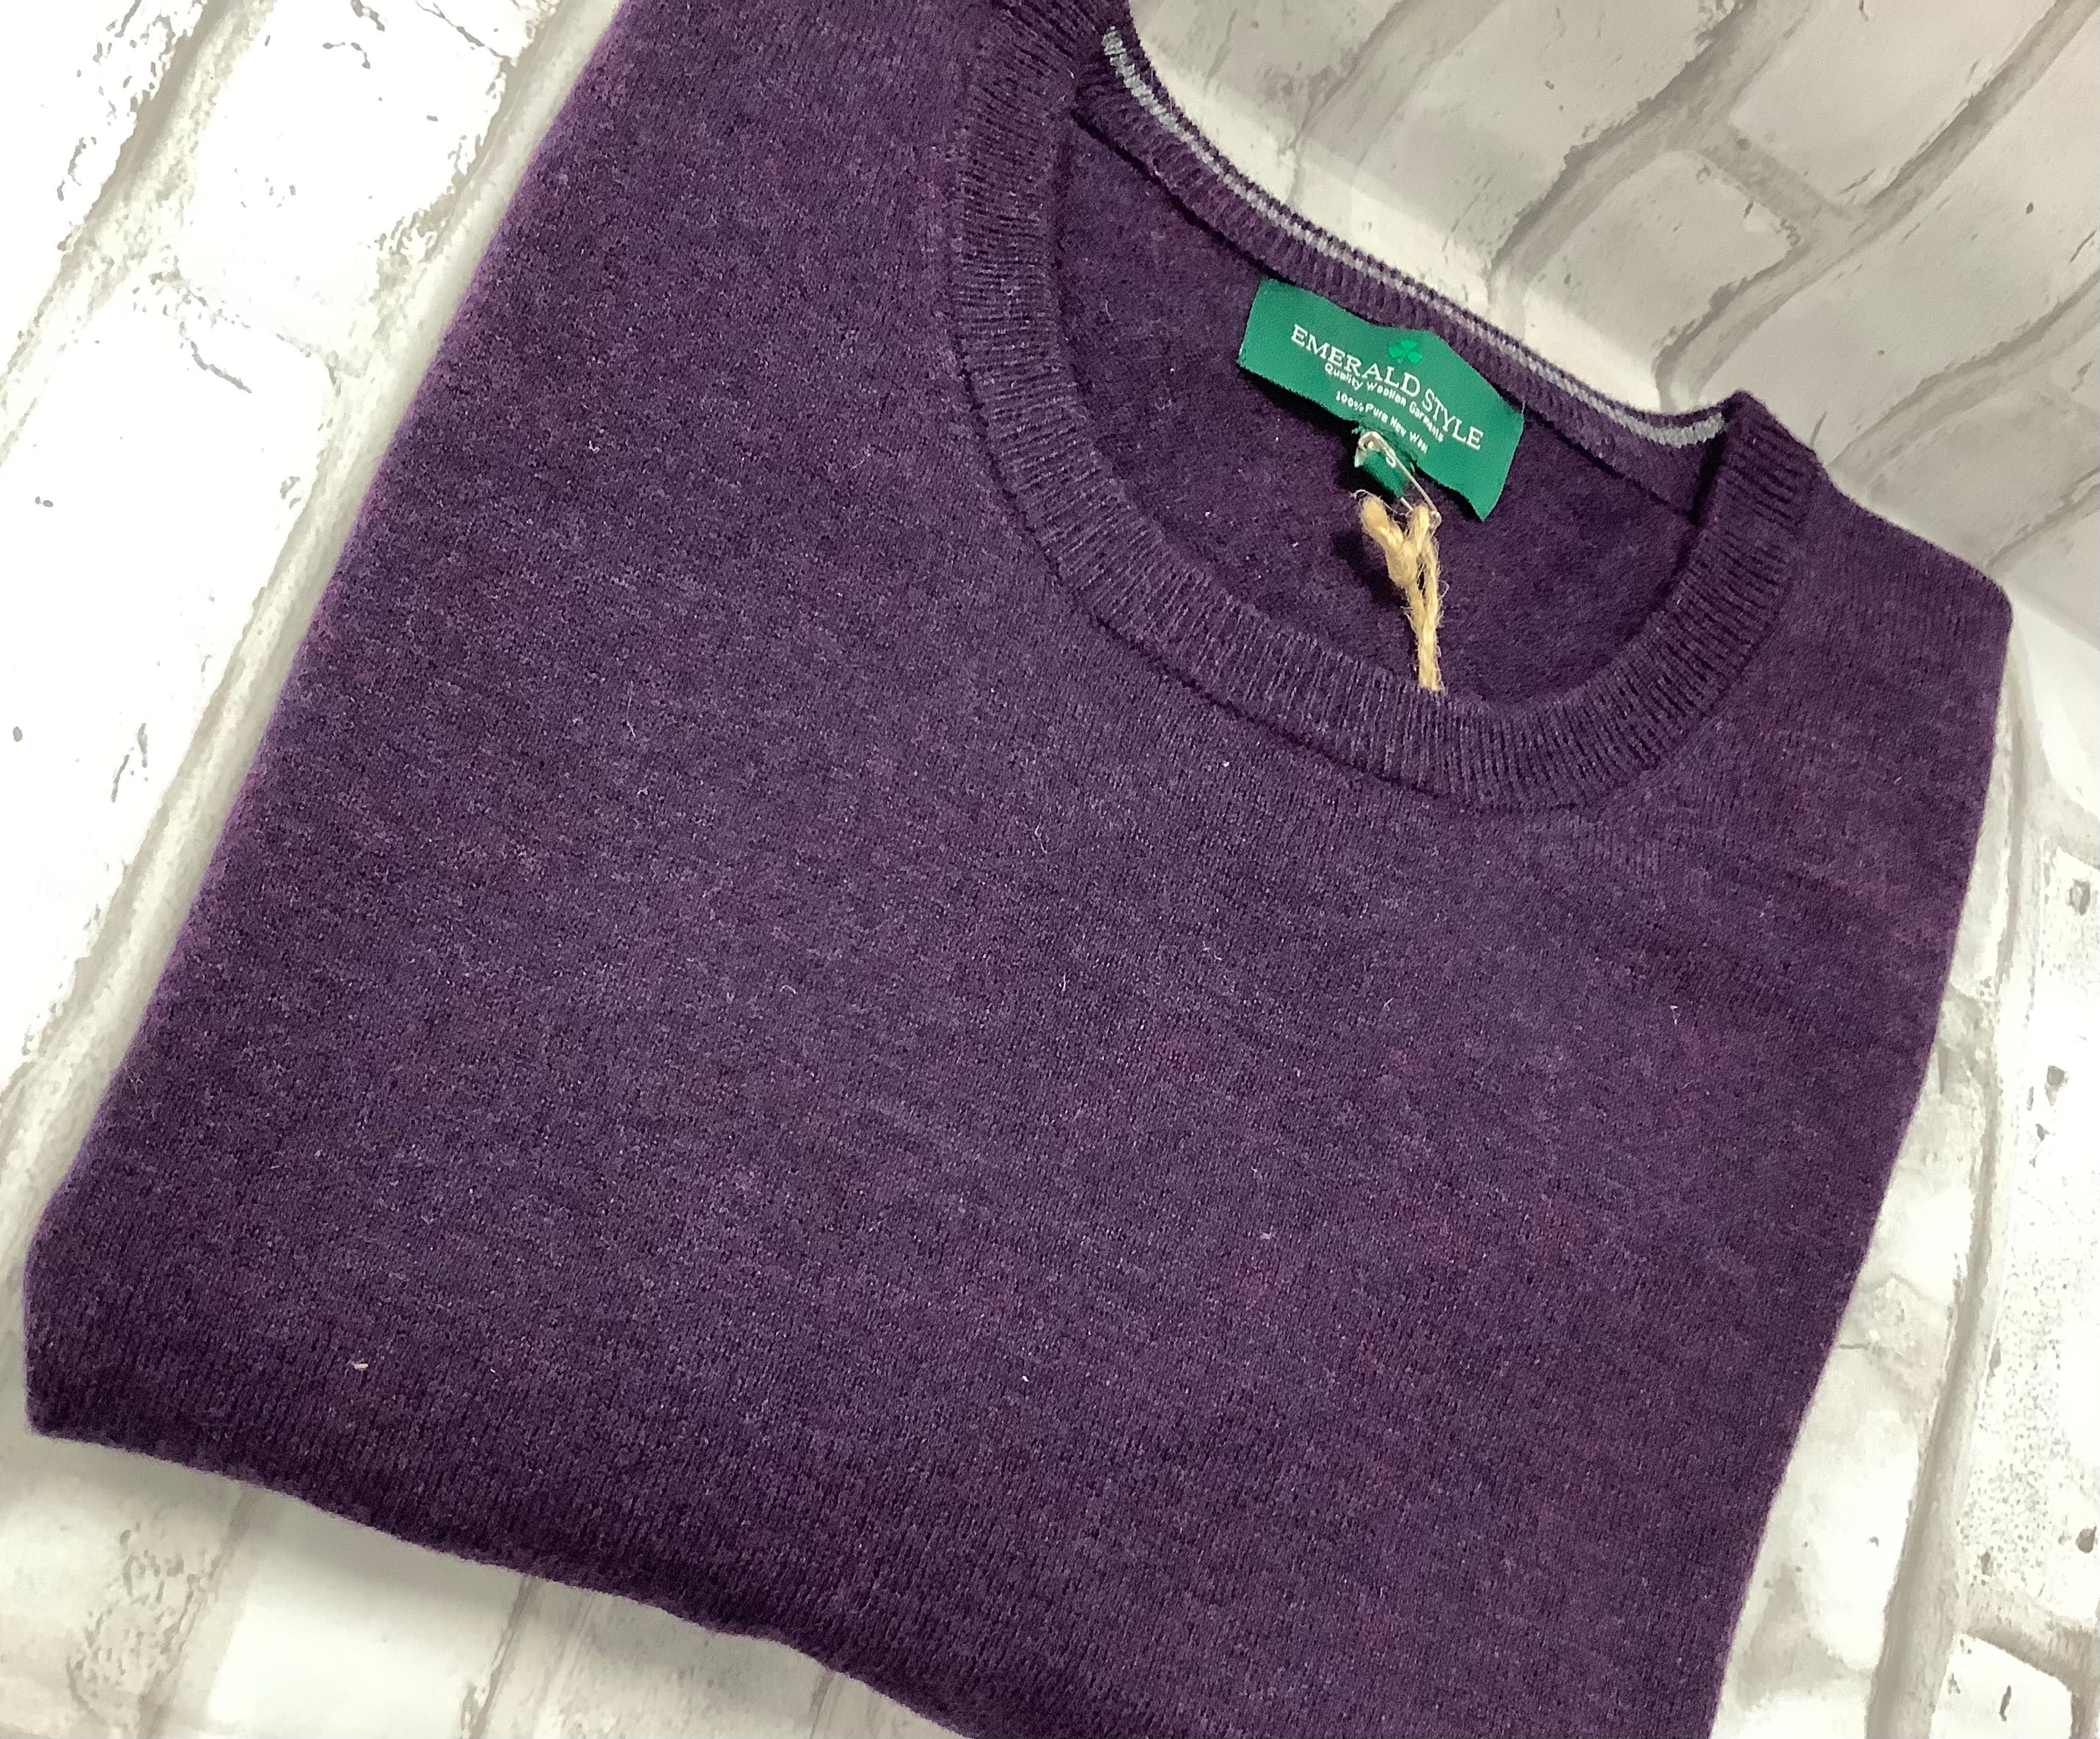 Men’s purple rounded lambs wool sweater